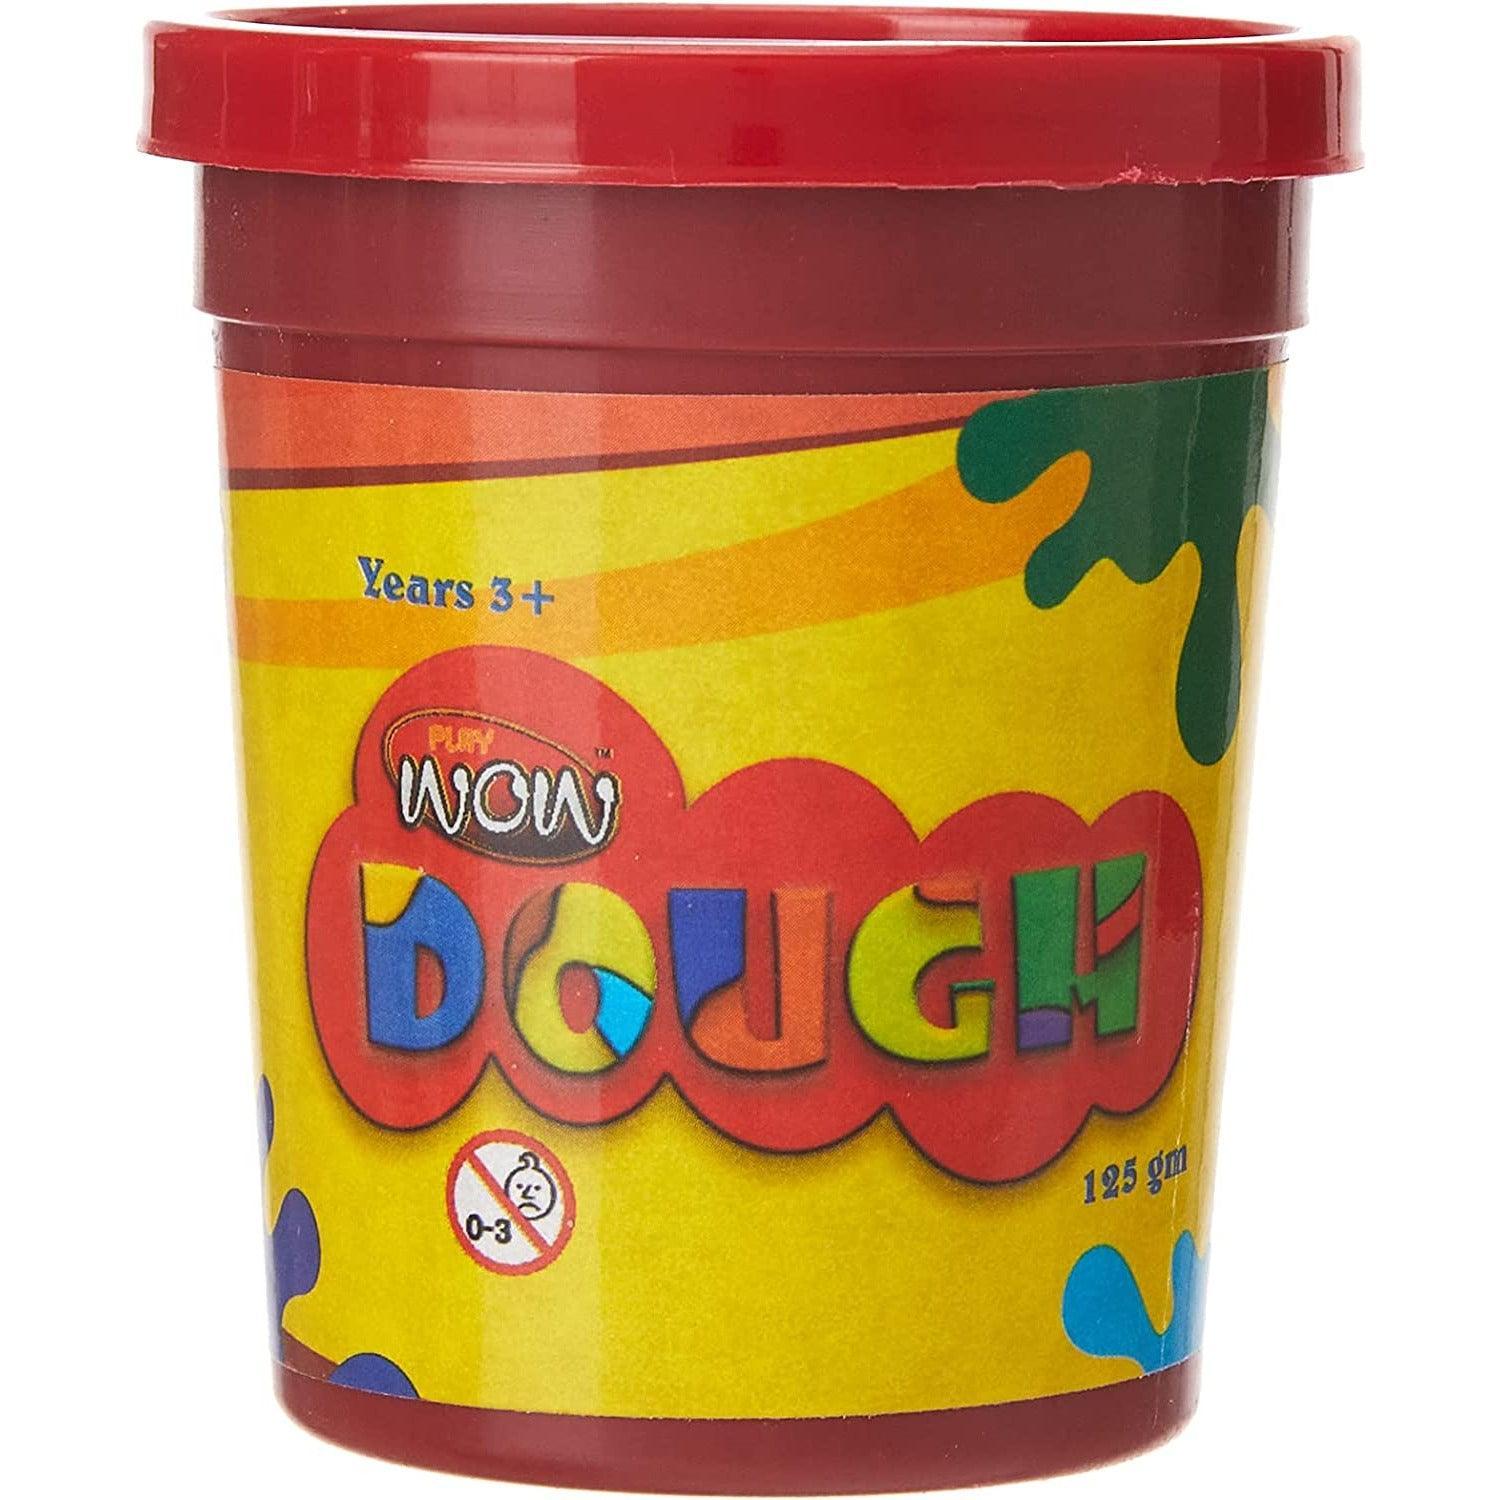 Wow Play Dough 4 Can Set - 125 gm - BumbleToys - 5-7 Years, Arabic Triangle Trading, Boys, Girls, Make & Create, Play-doh